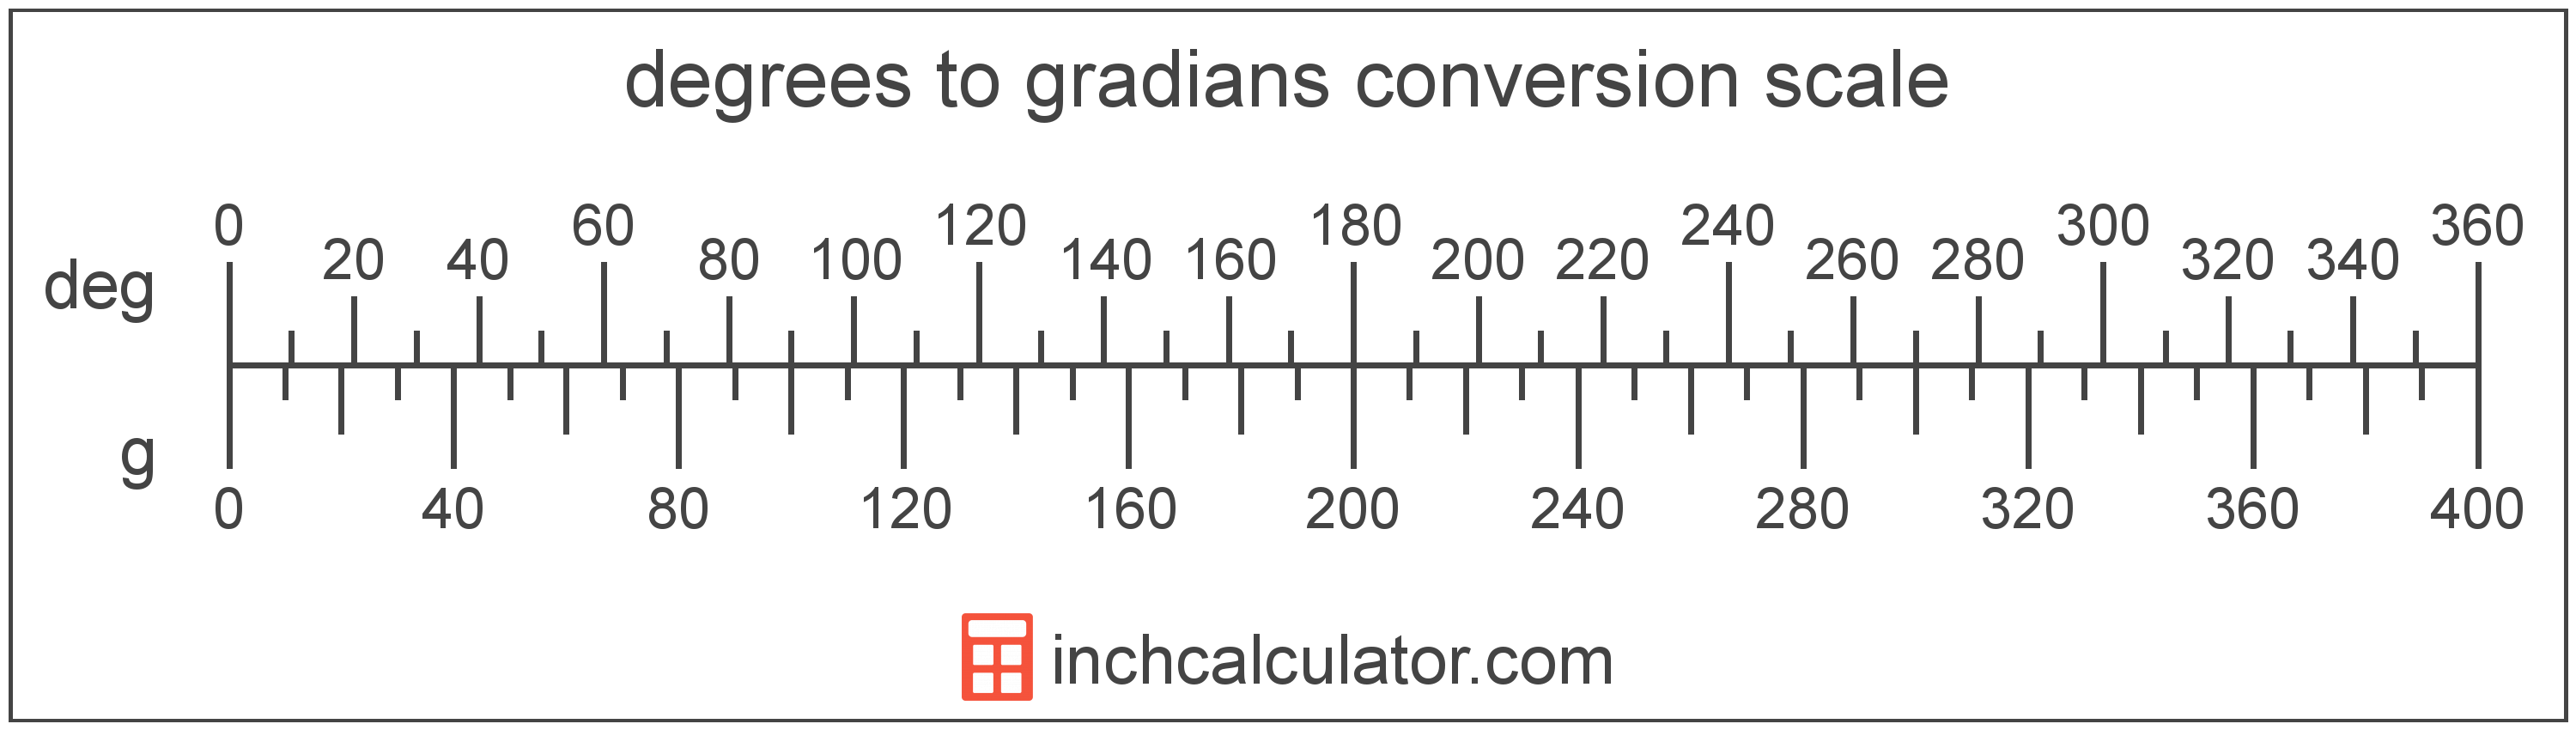 conversion scale showing degrees and equivalent gradians angle values